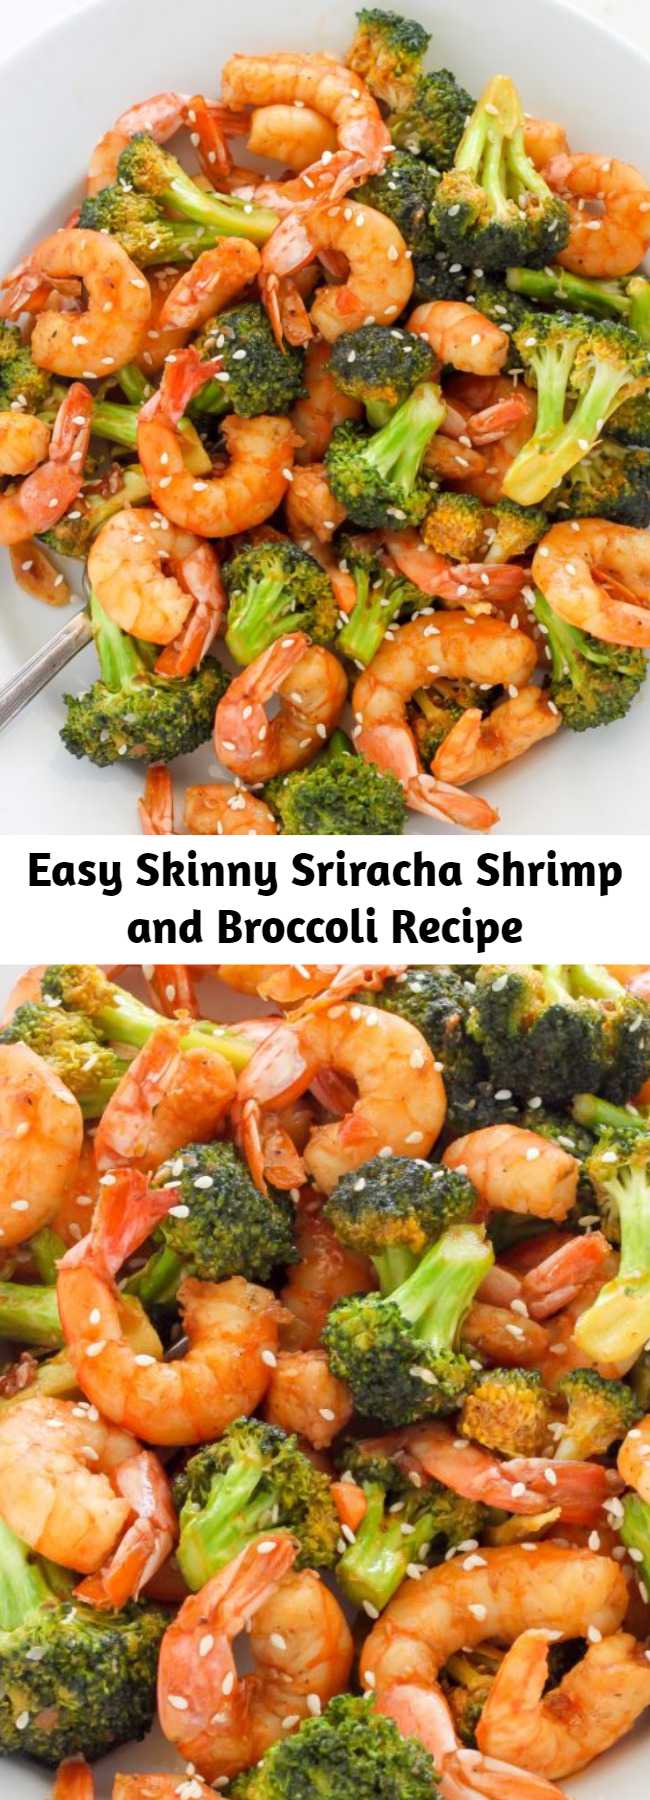 Easy Skinny Sriracha Shrimp and Broccoli Recipe - This 20-Minute Skinny Sriracha Shrimp and Broccoli is exploding with flavor! Plump shrimp and crunchy broccoli are cooked in a delicious sriracha soy sauce. A quick and easy meal you're sure to love! This healthy meal is always a hit with my family.